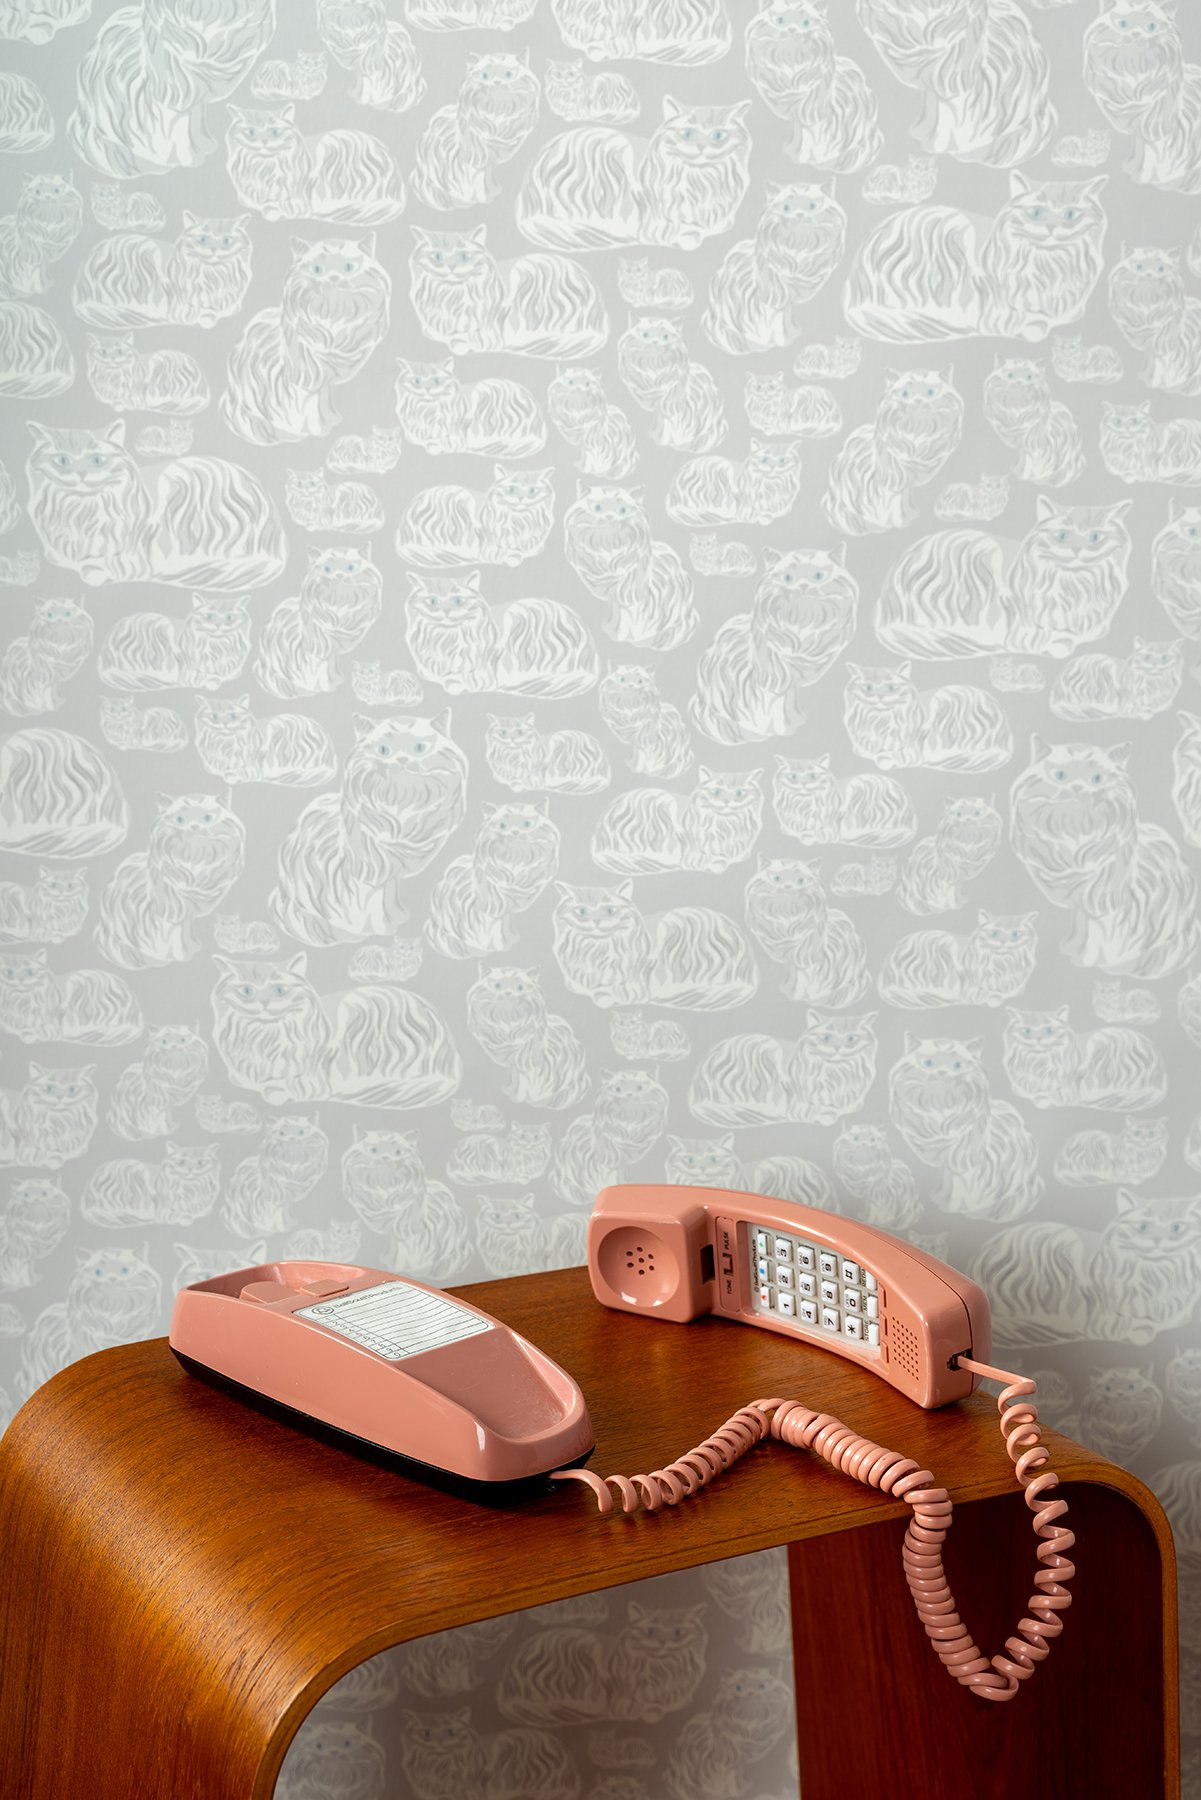 Kate Golding Porcelain Cats wallpaper // Modern wallcoverings and interior decor.